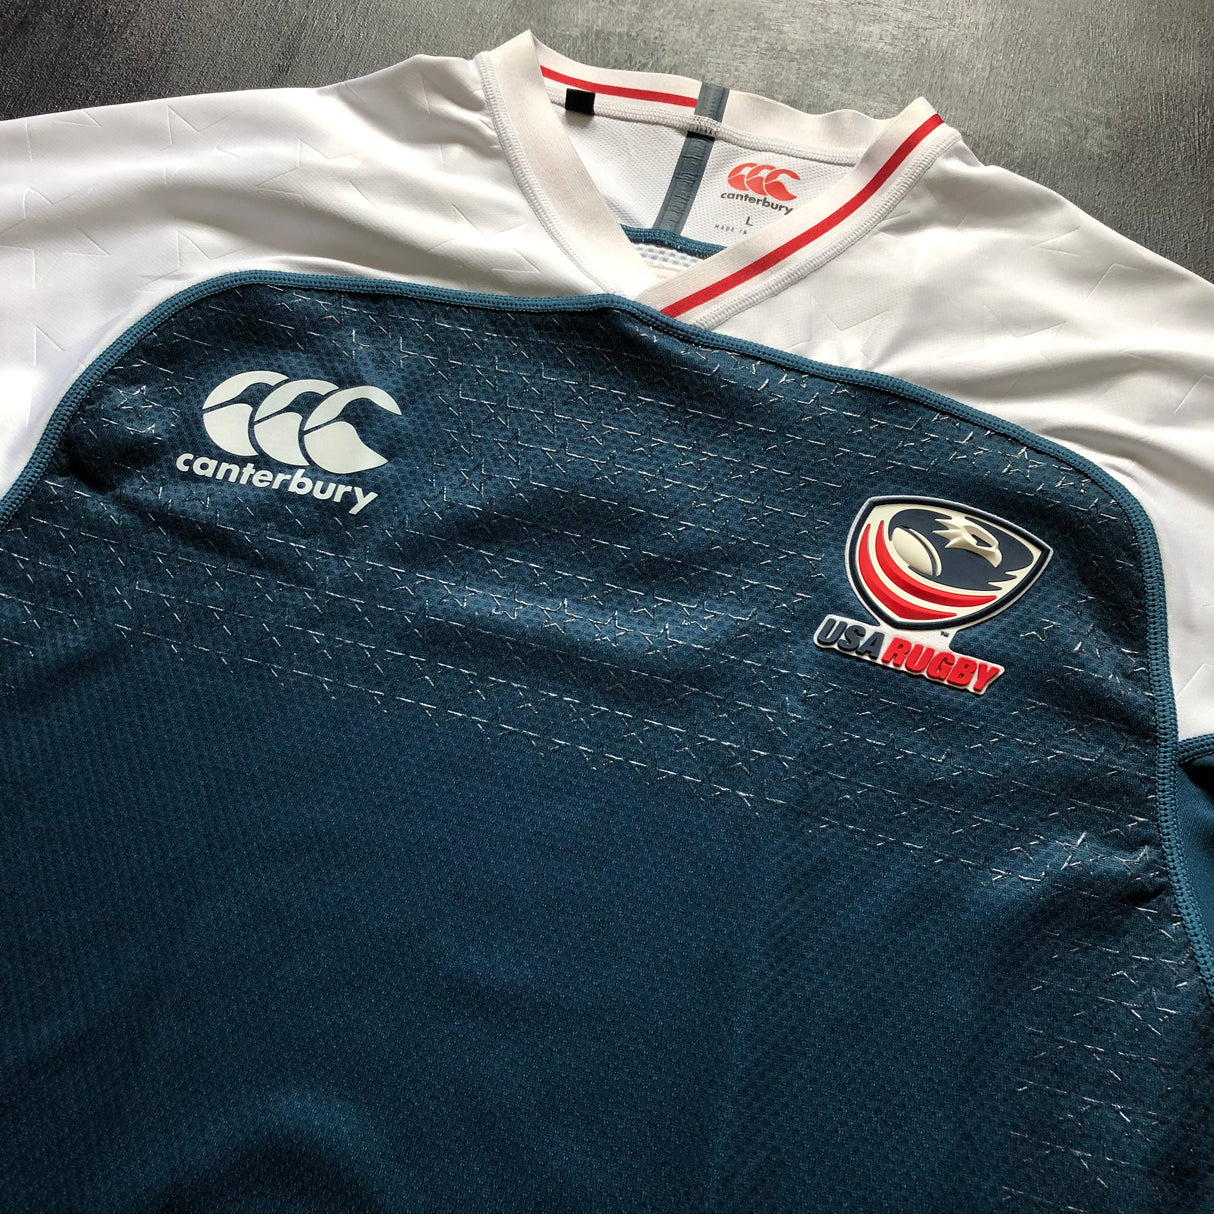 USA National Rugby Team Jersey 2019 Player Issue Large Underdog Rugby - The Tier 2 Rugby Shop 